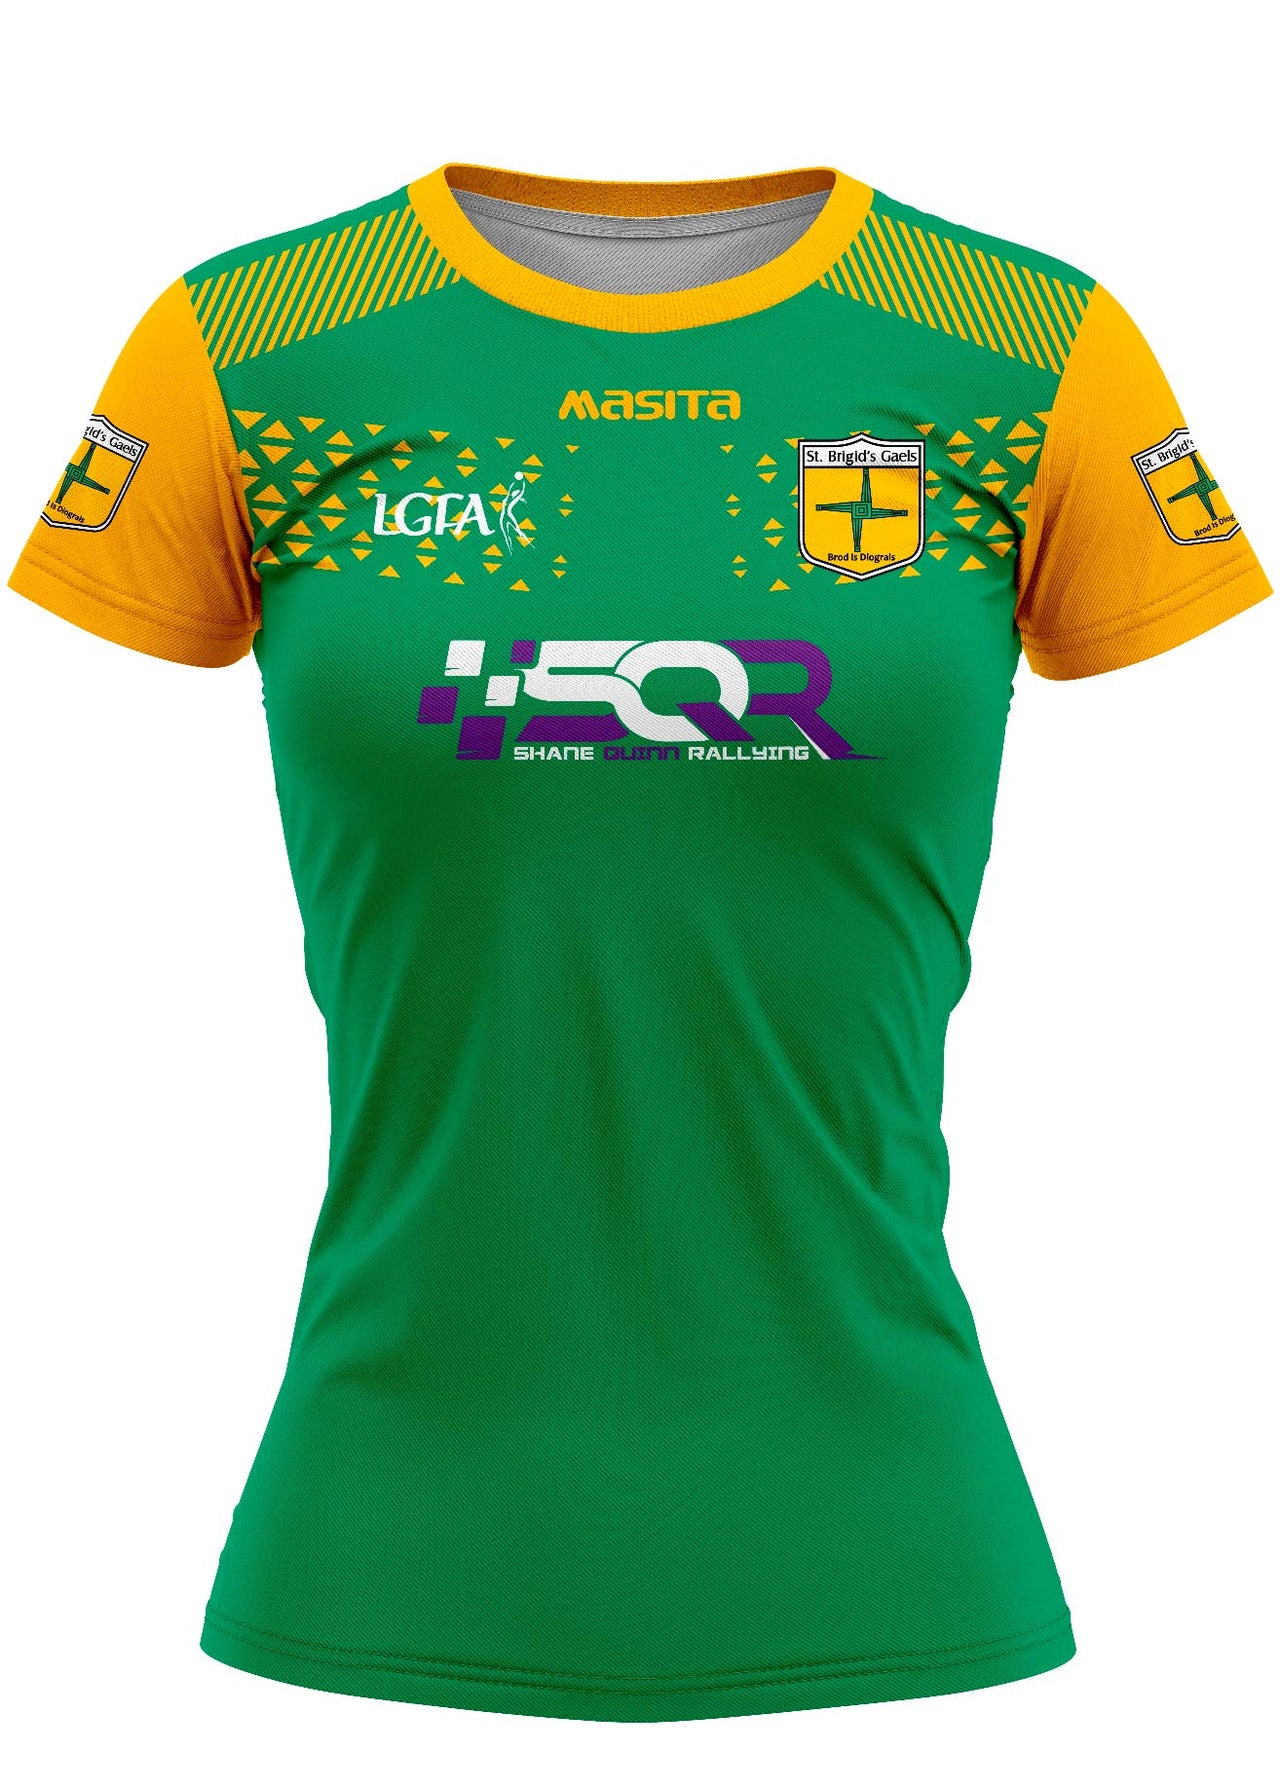 St Brigid's Gaels Ardagh Home Jersey Player Fit Adult